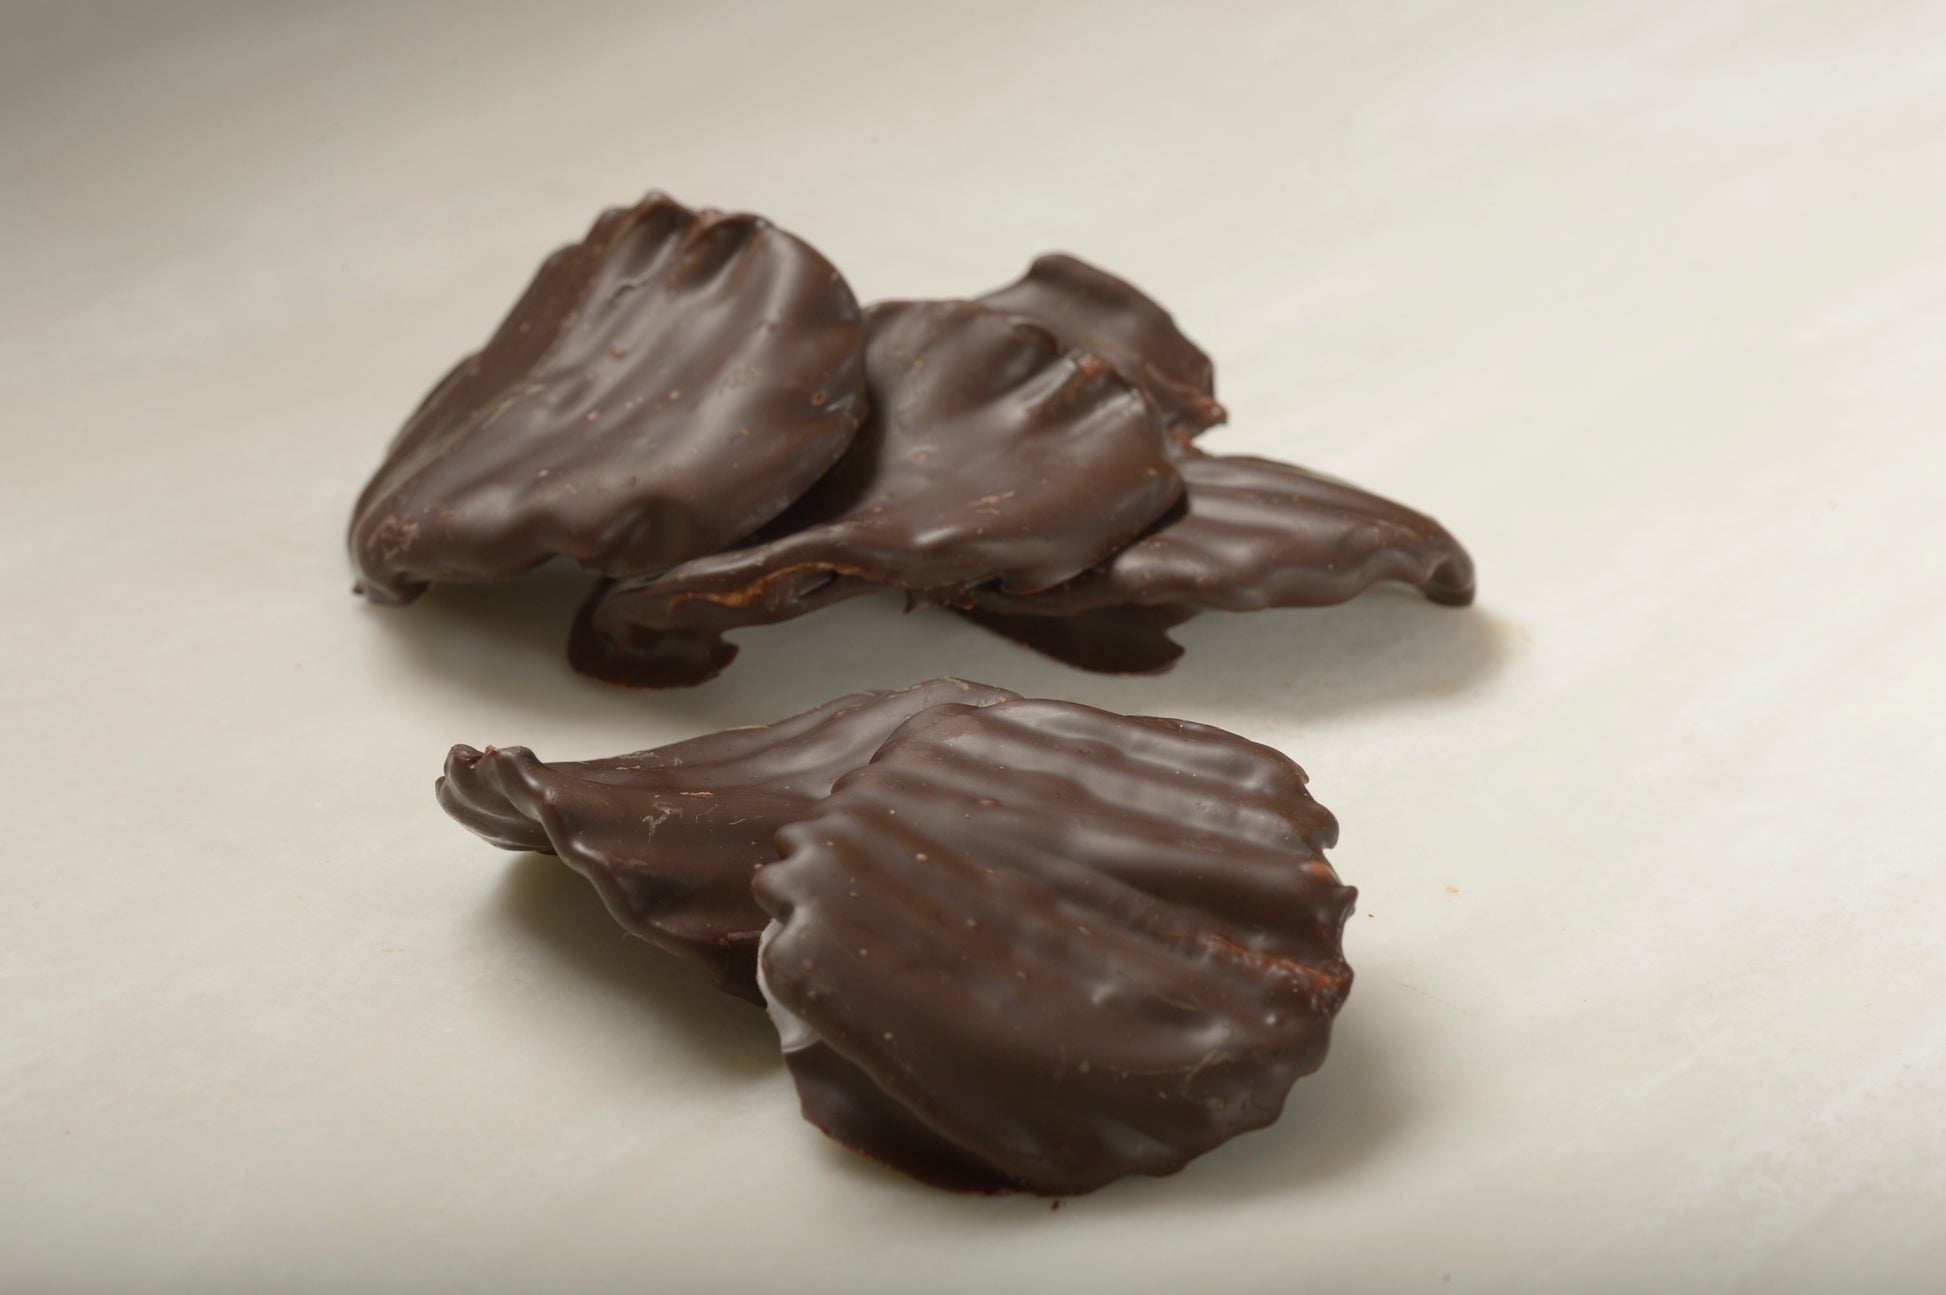 Dark Chocolate Covered Potato Chips - Hand-dipped in gourmet dark chocolate. Featured on Good Morning America.